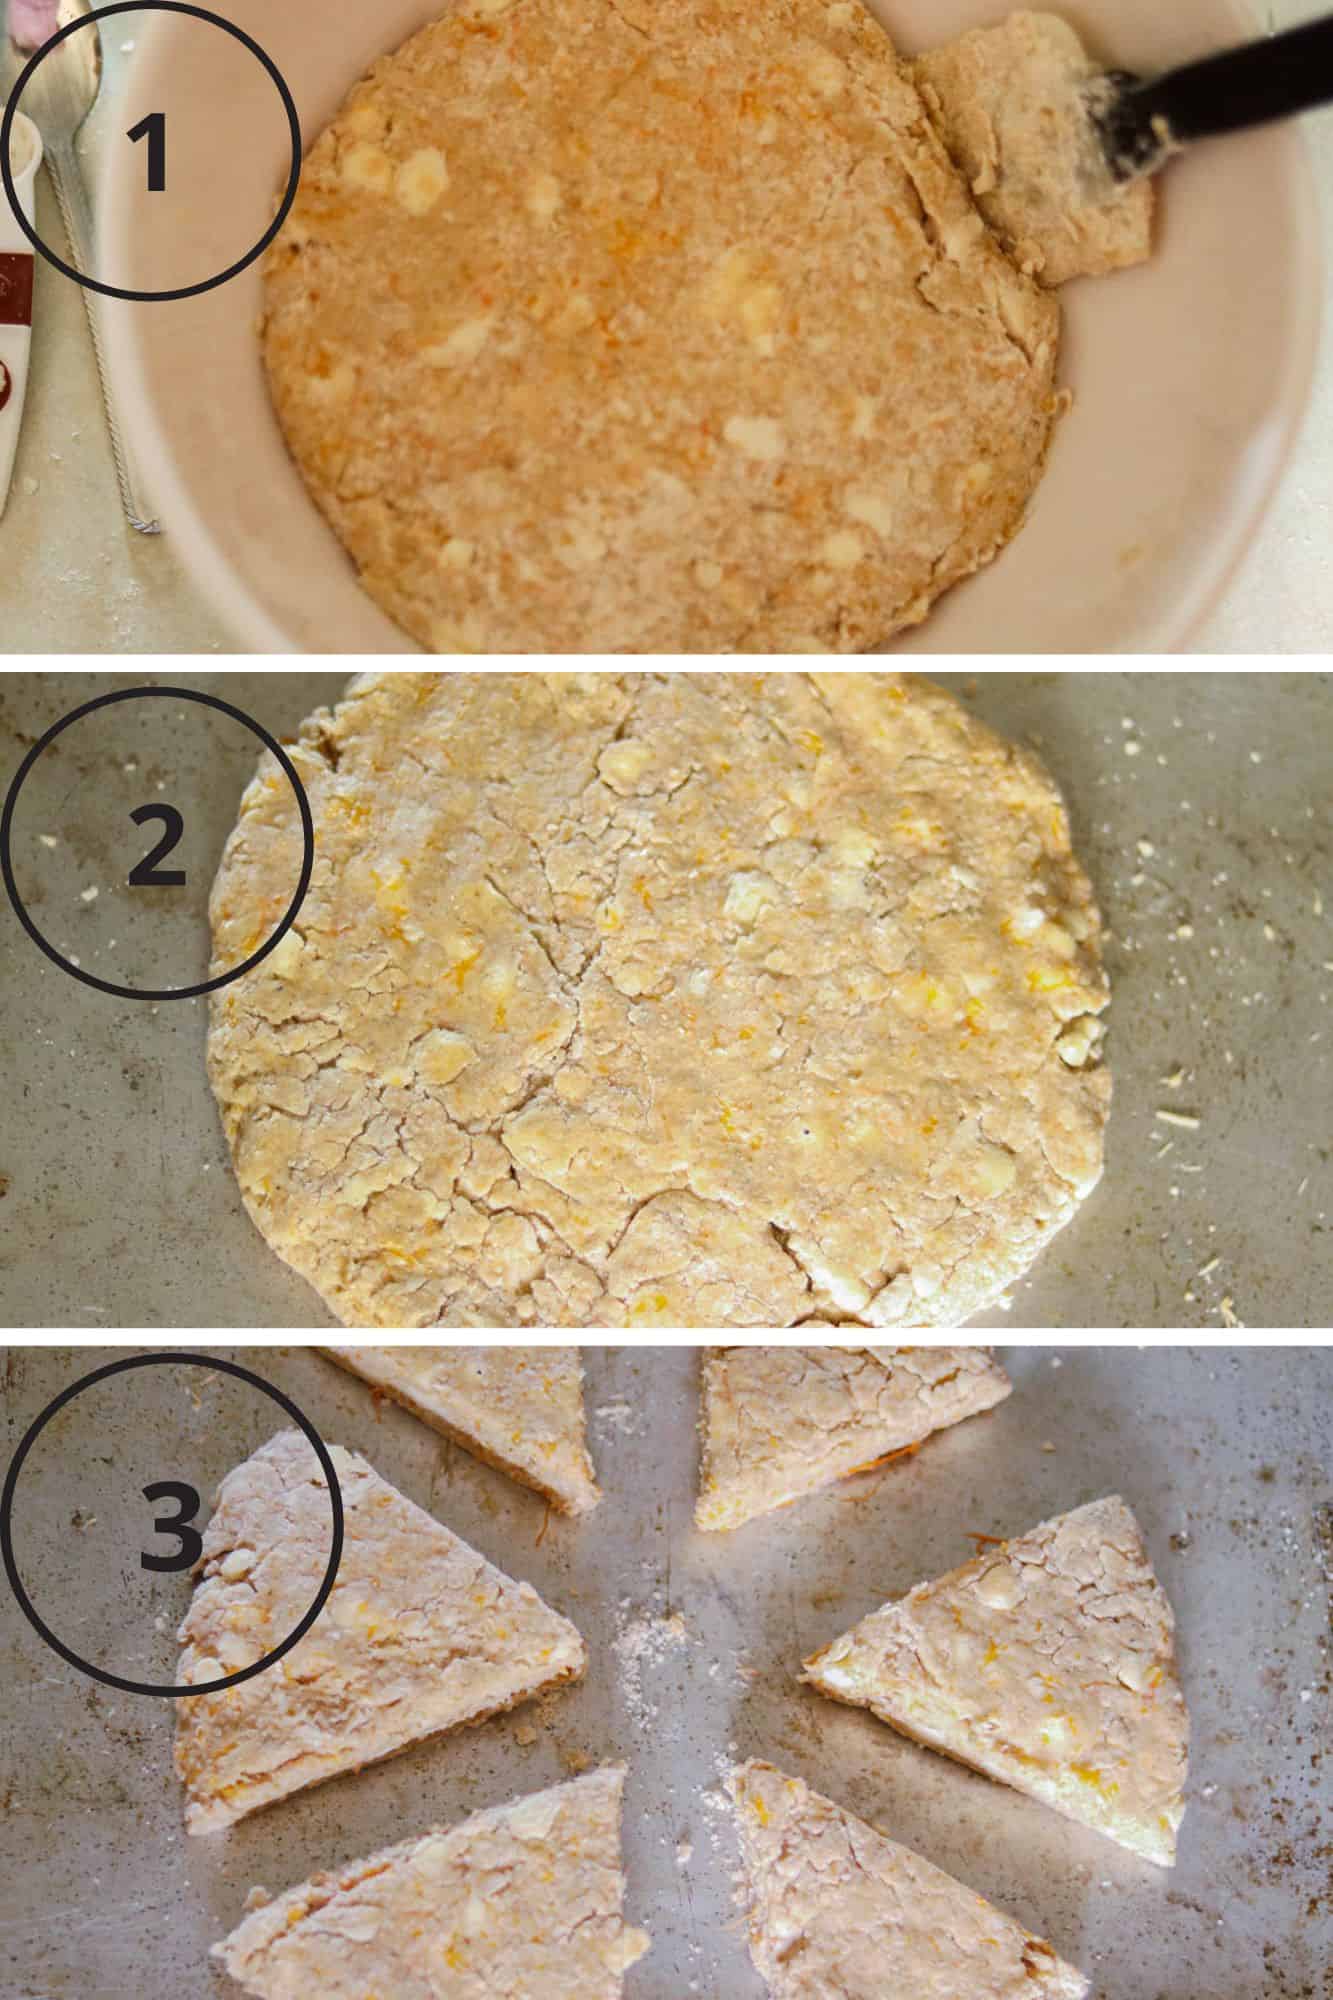 photos showing shaping the scone dough and getting ready to bake.